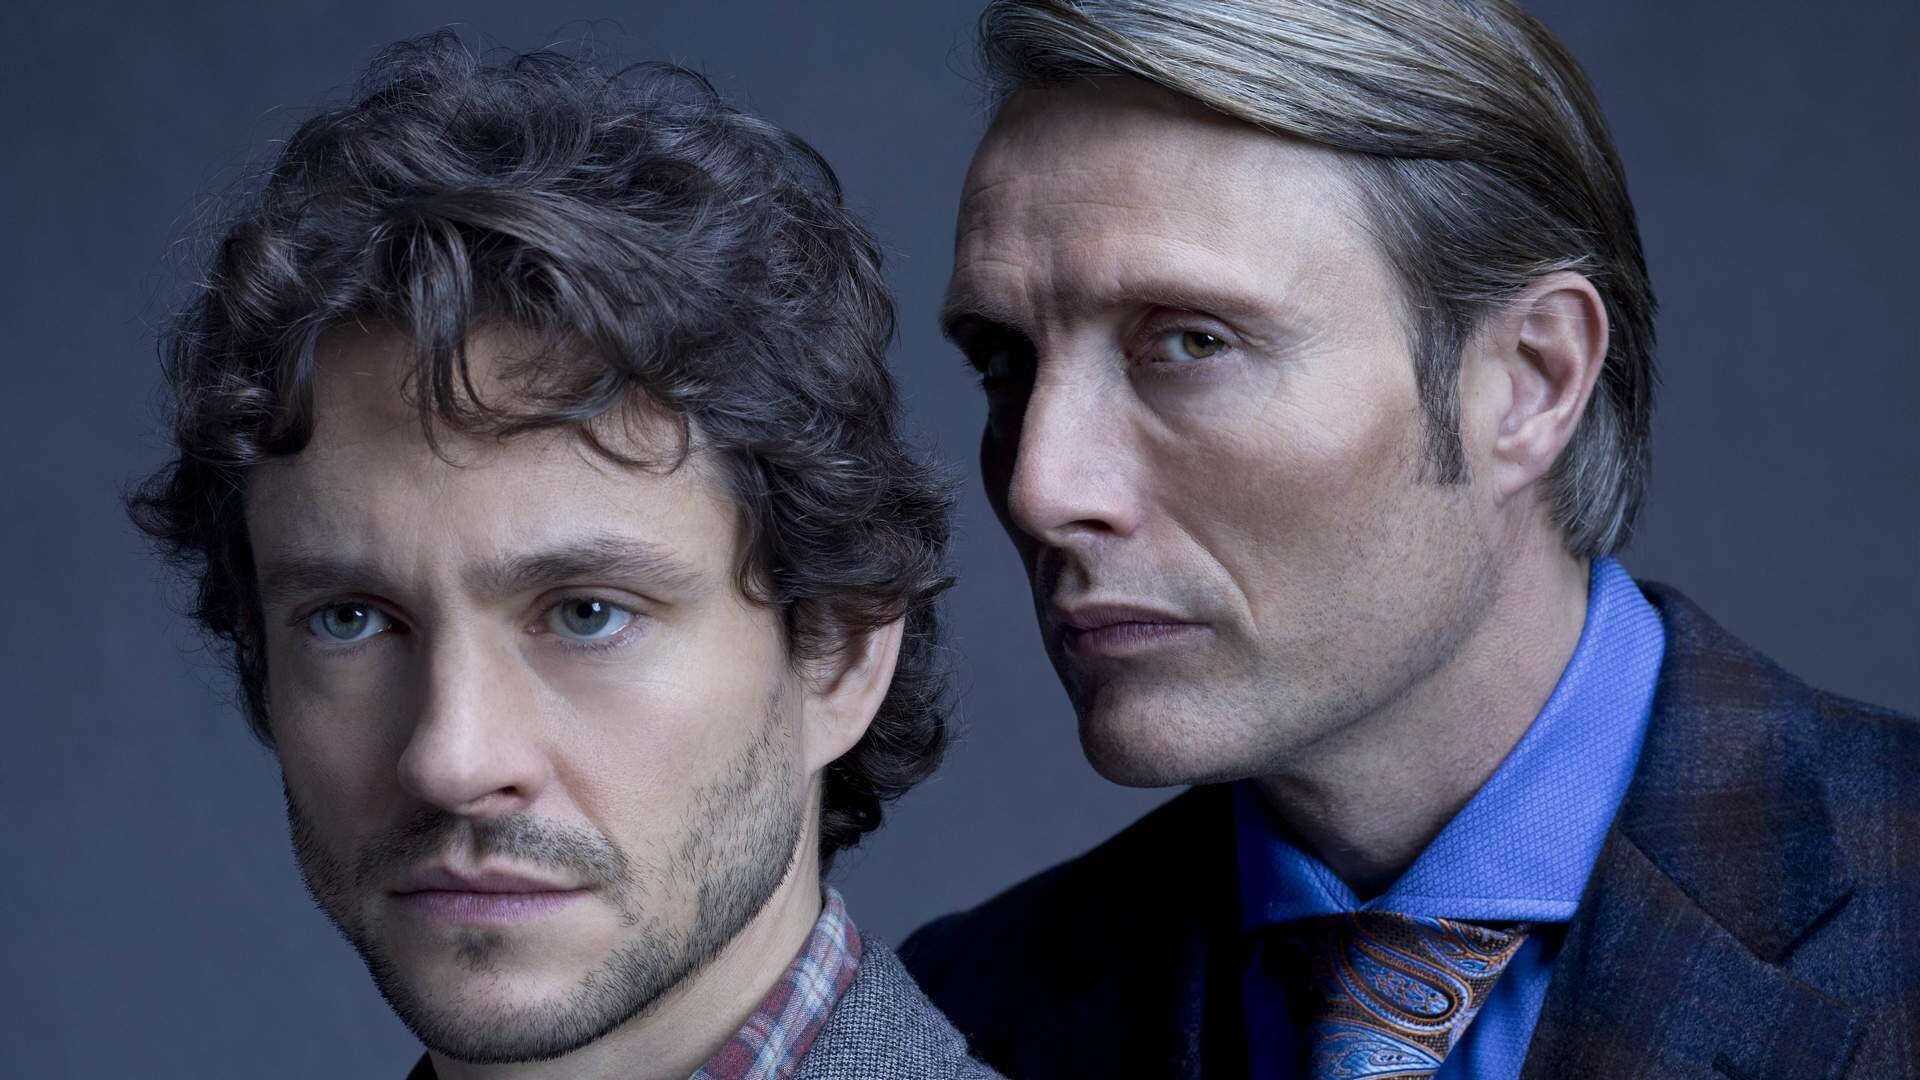 Hannibal's essence, Intriguing montage, Sublime darkness, Distorted reality, 1920x1080 Full HD Desktop